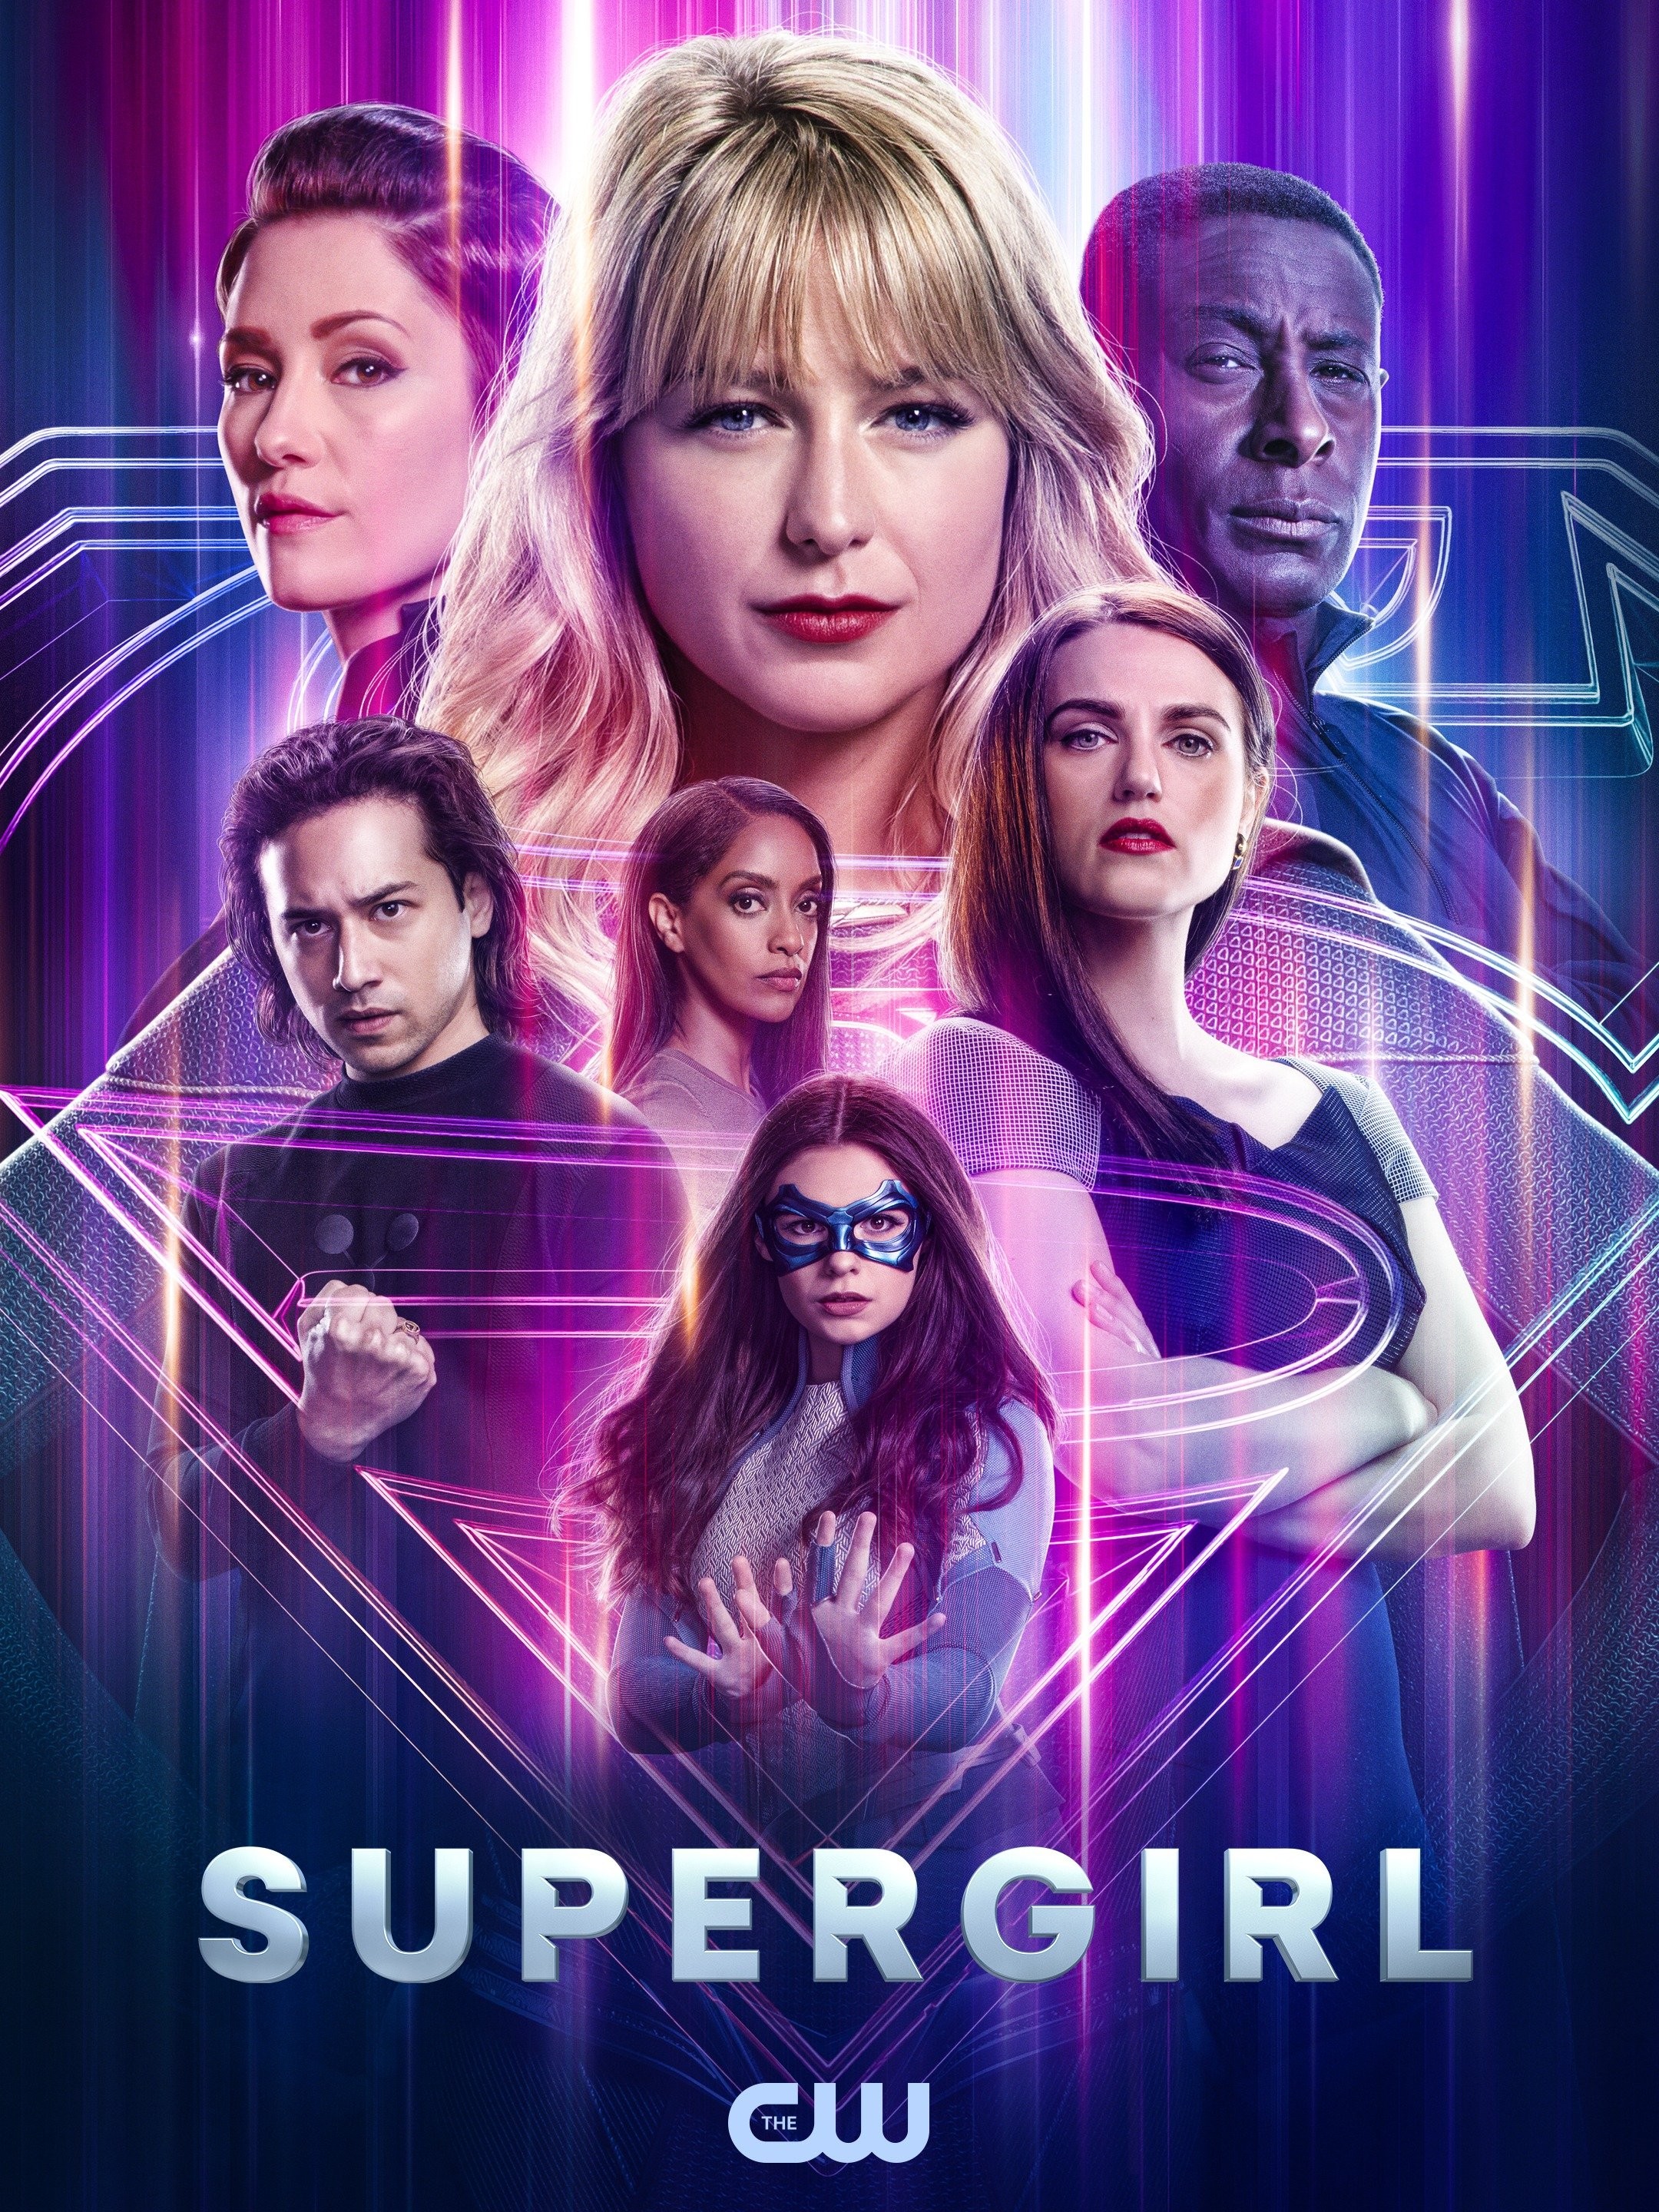 How to watch and stream Supergirl - 1984 on Roku